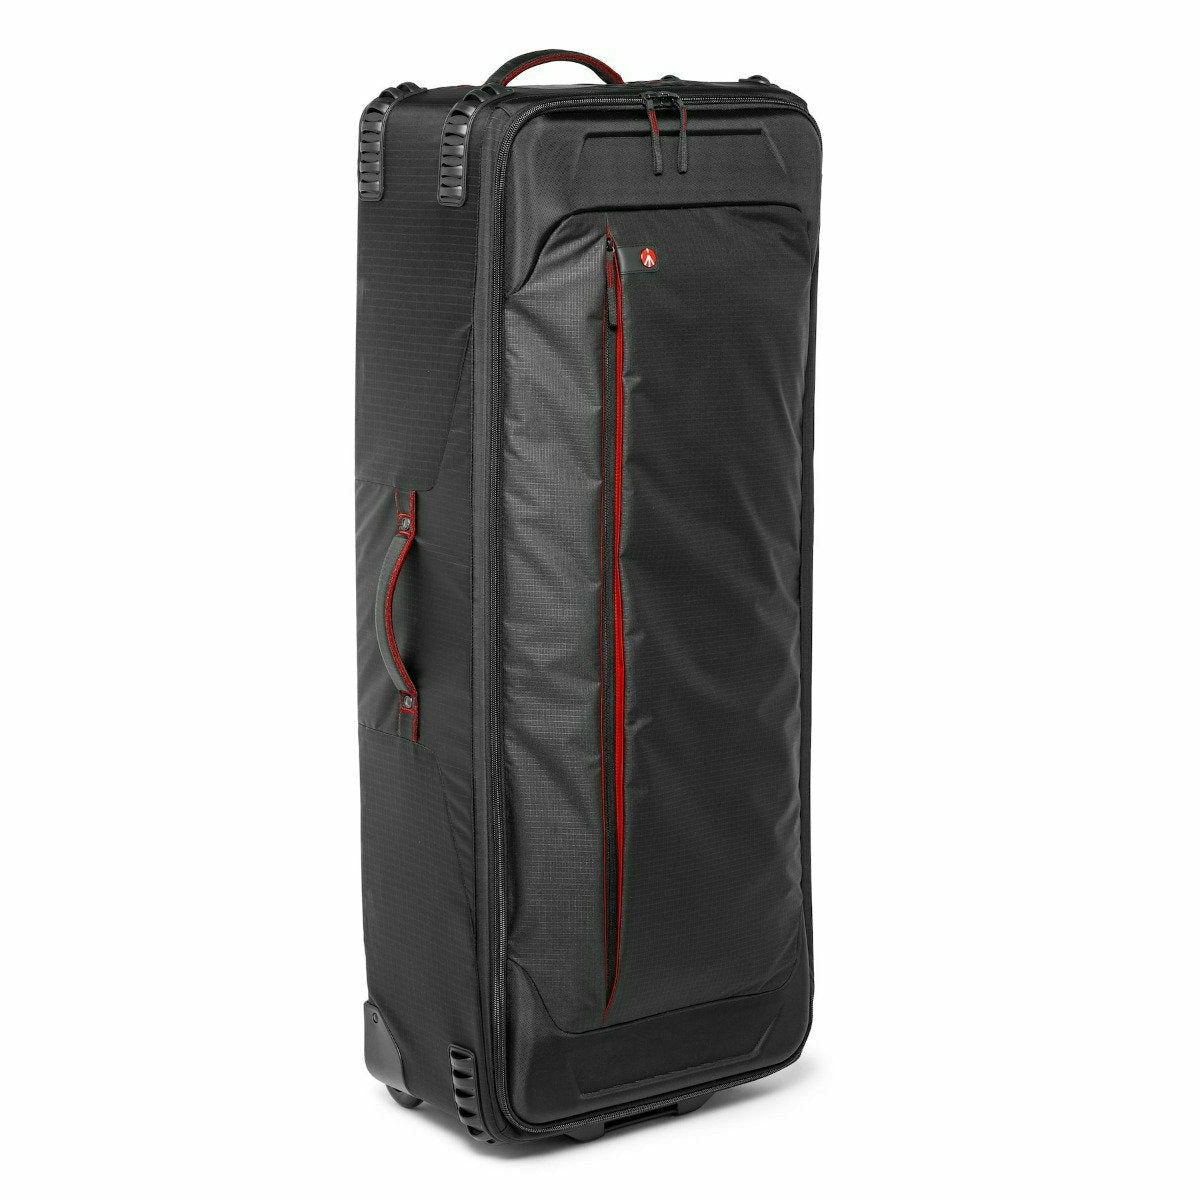 MANFROTTO MBPLLW99-2 Case Rolling Organizer LW-99-2 - Dragon Image